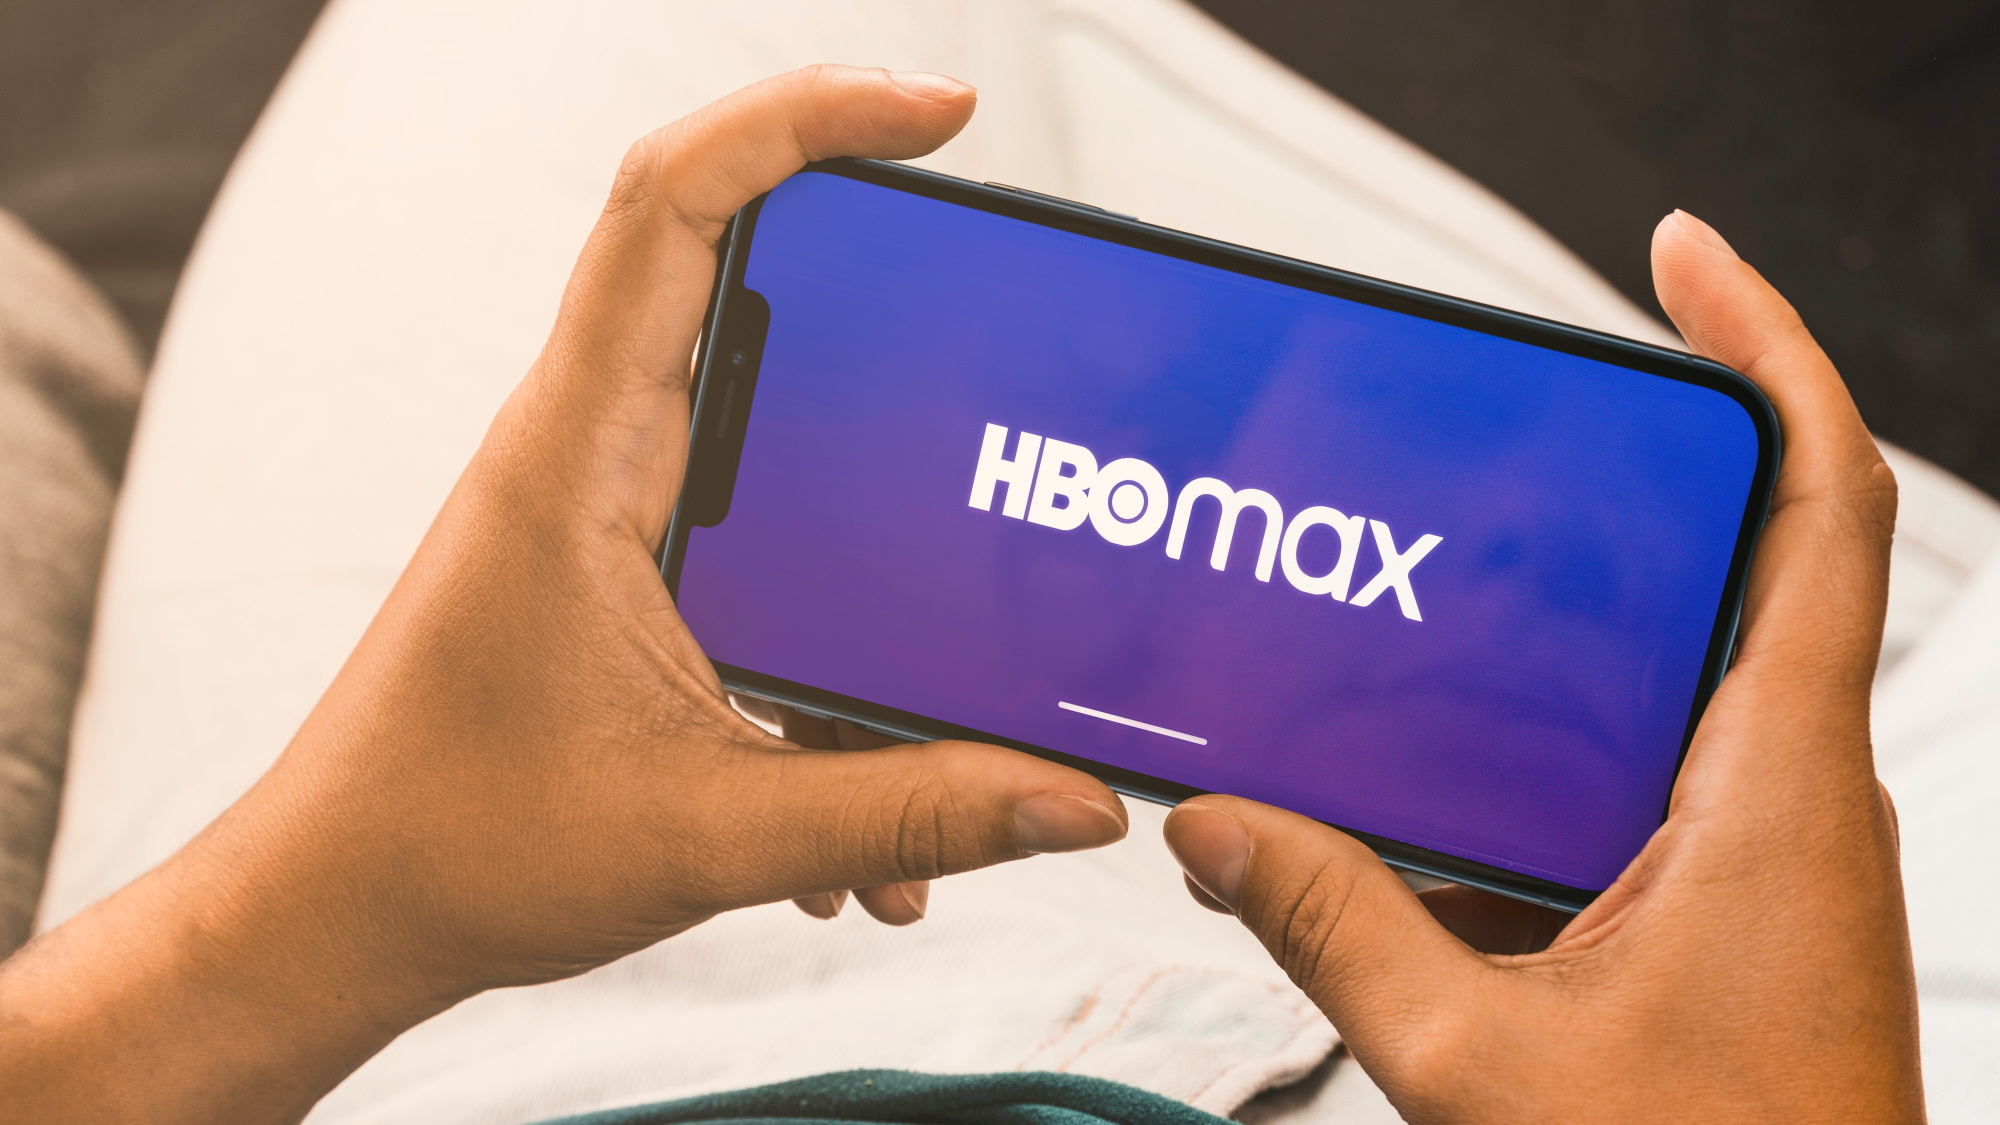 HBO Max devices